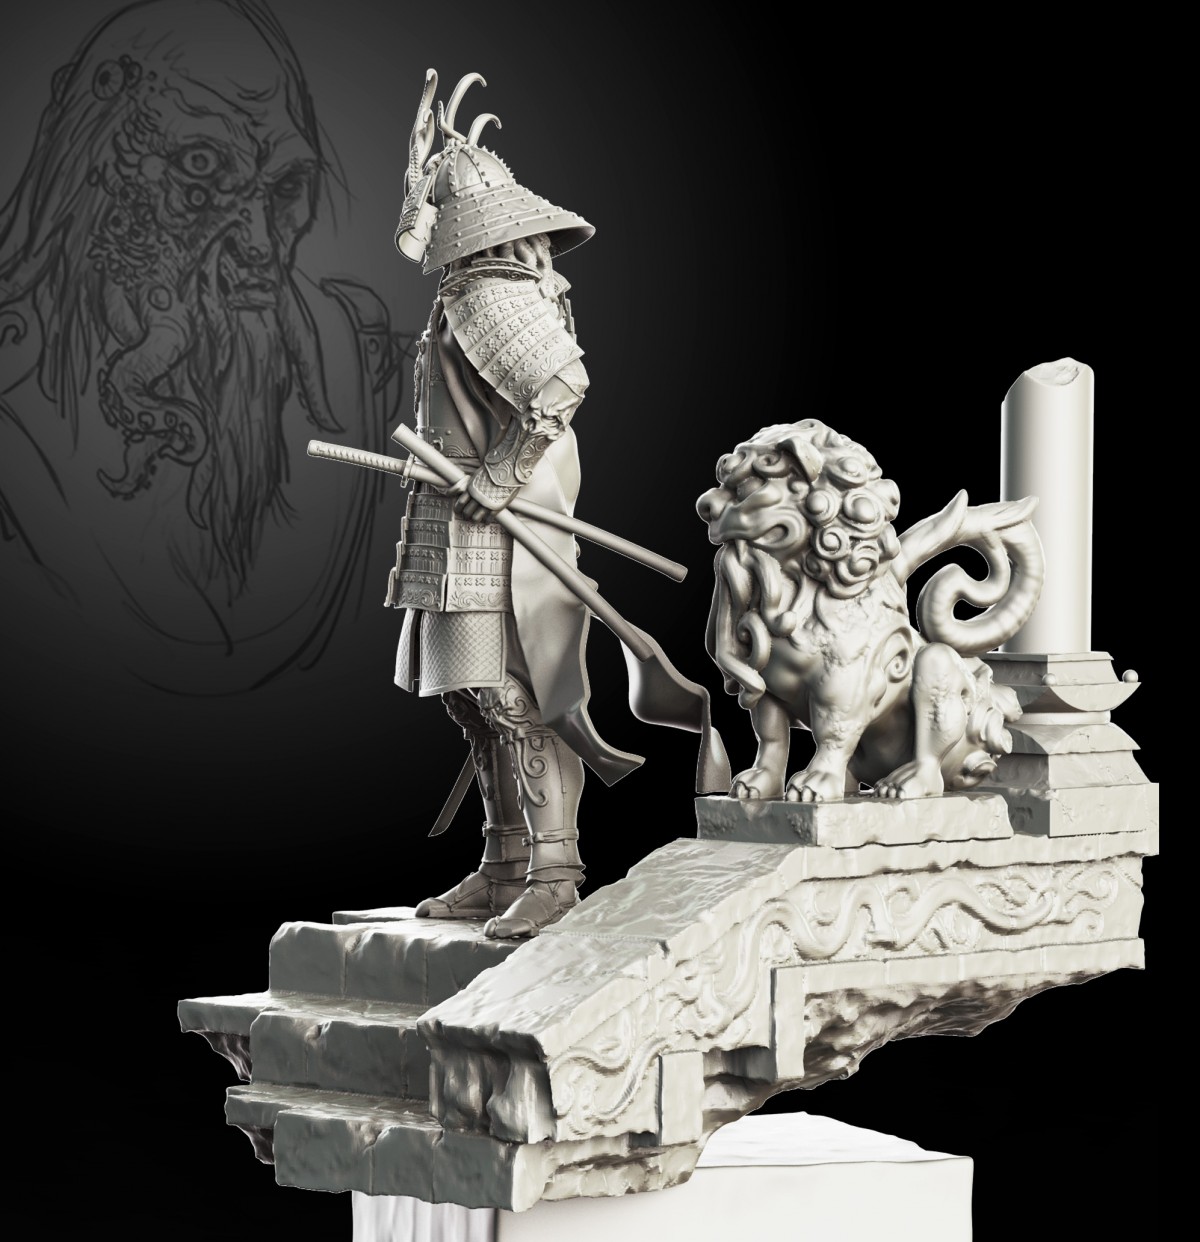 Camurai 75mm - Order of Cthulhu by Michael Kontraros · Putty&amp;Paint